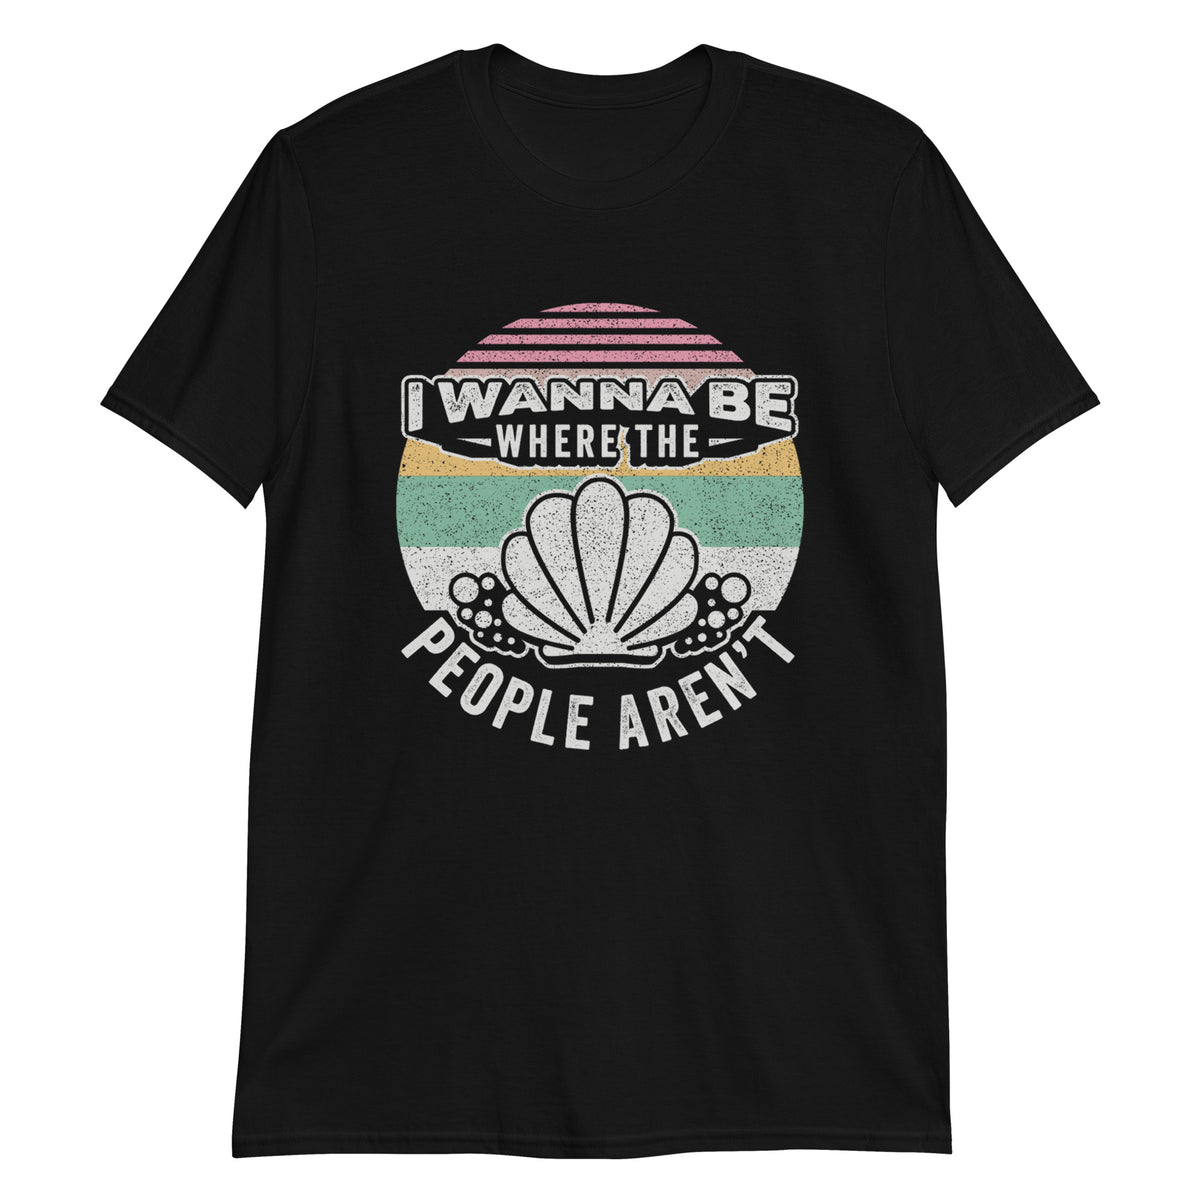 I Wanna Be Where The People Aren't T-Shirt